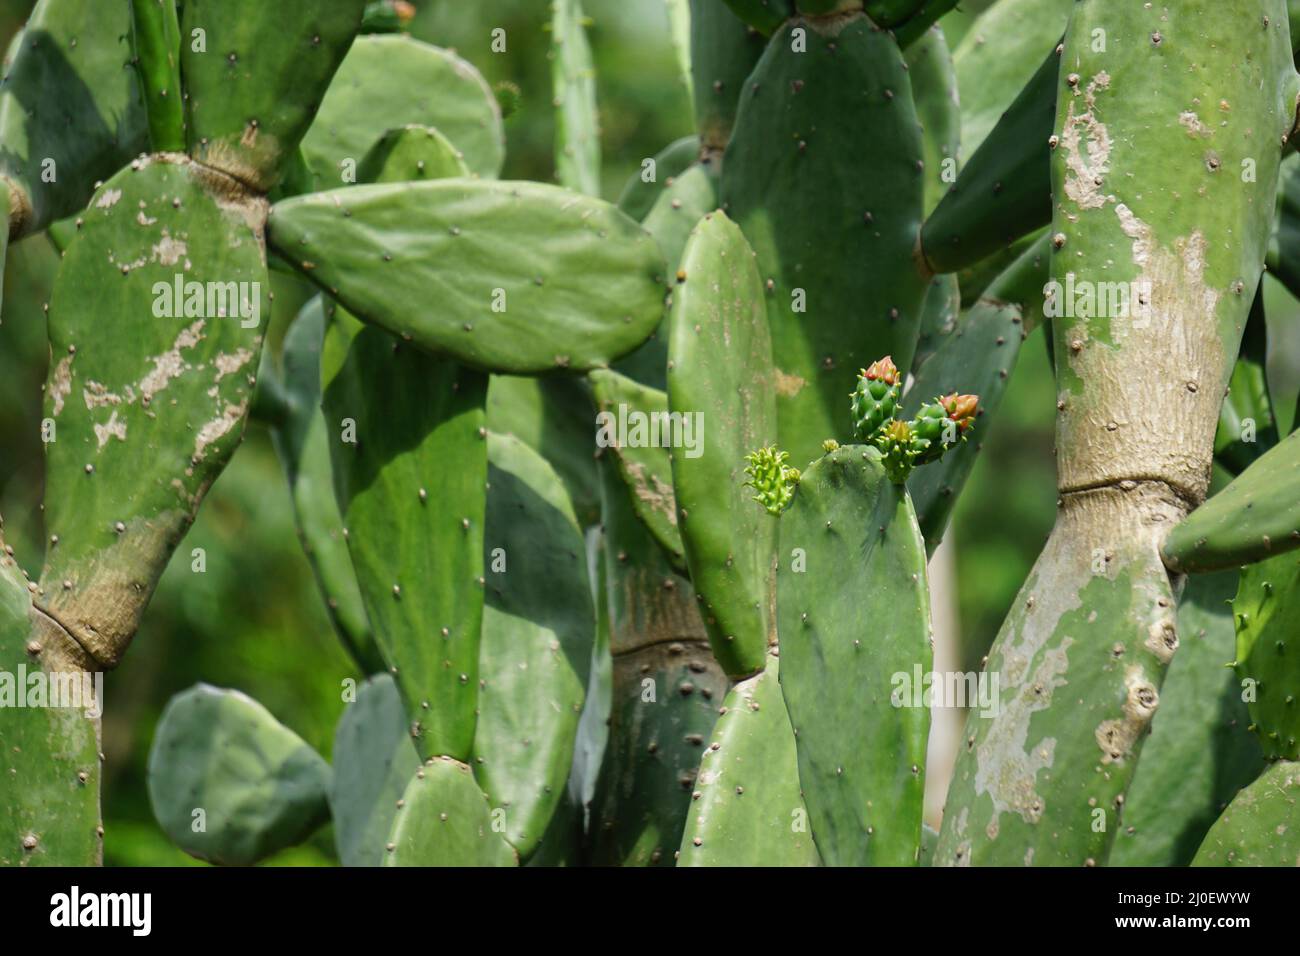 Opuntia cochenillifera (Also called Warm hand, nopal cactus) with a natural background. Opuntia cochenillifera is one of cactus species Stock Photo